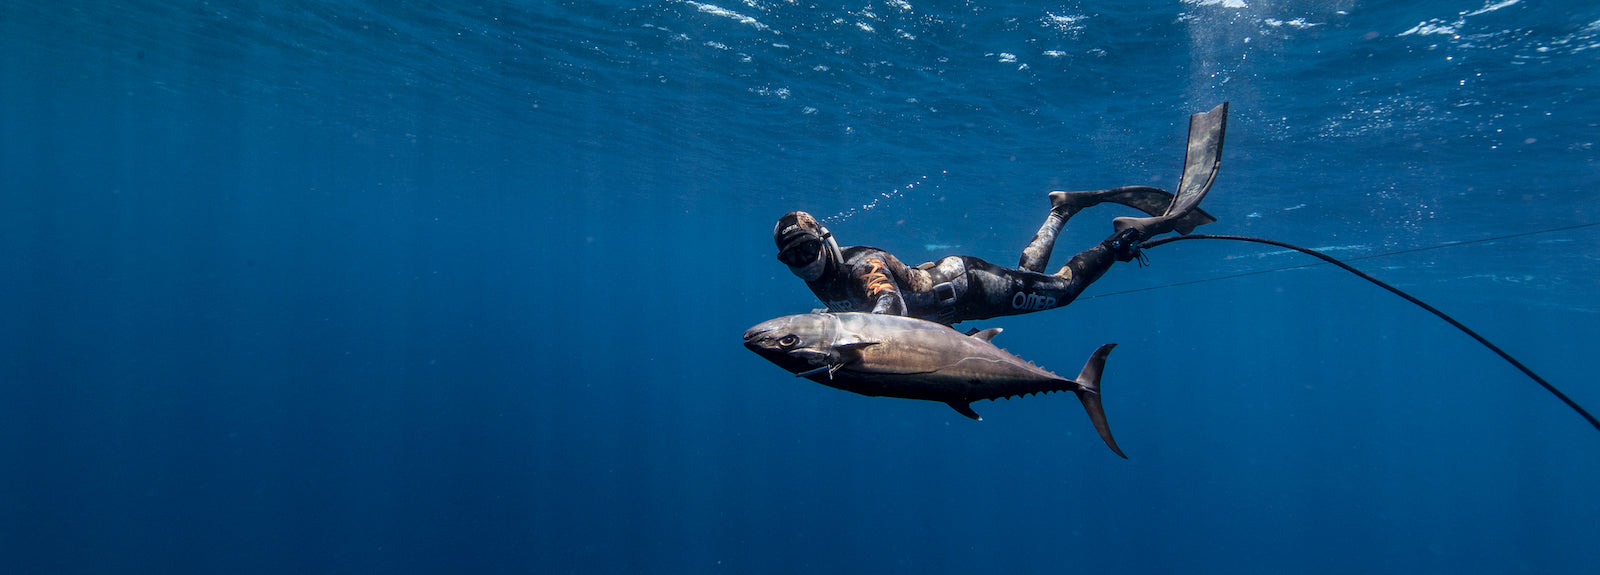 Ocean Guardian USA - THE WORLD'S MOST EFFECTIVE SHARK DETERRENTS - Man spearfishing - SHOP NOW